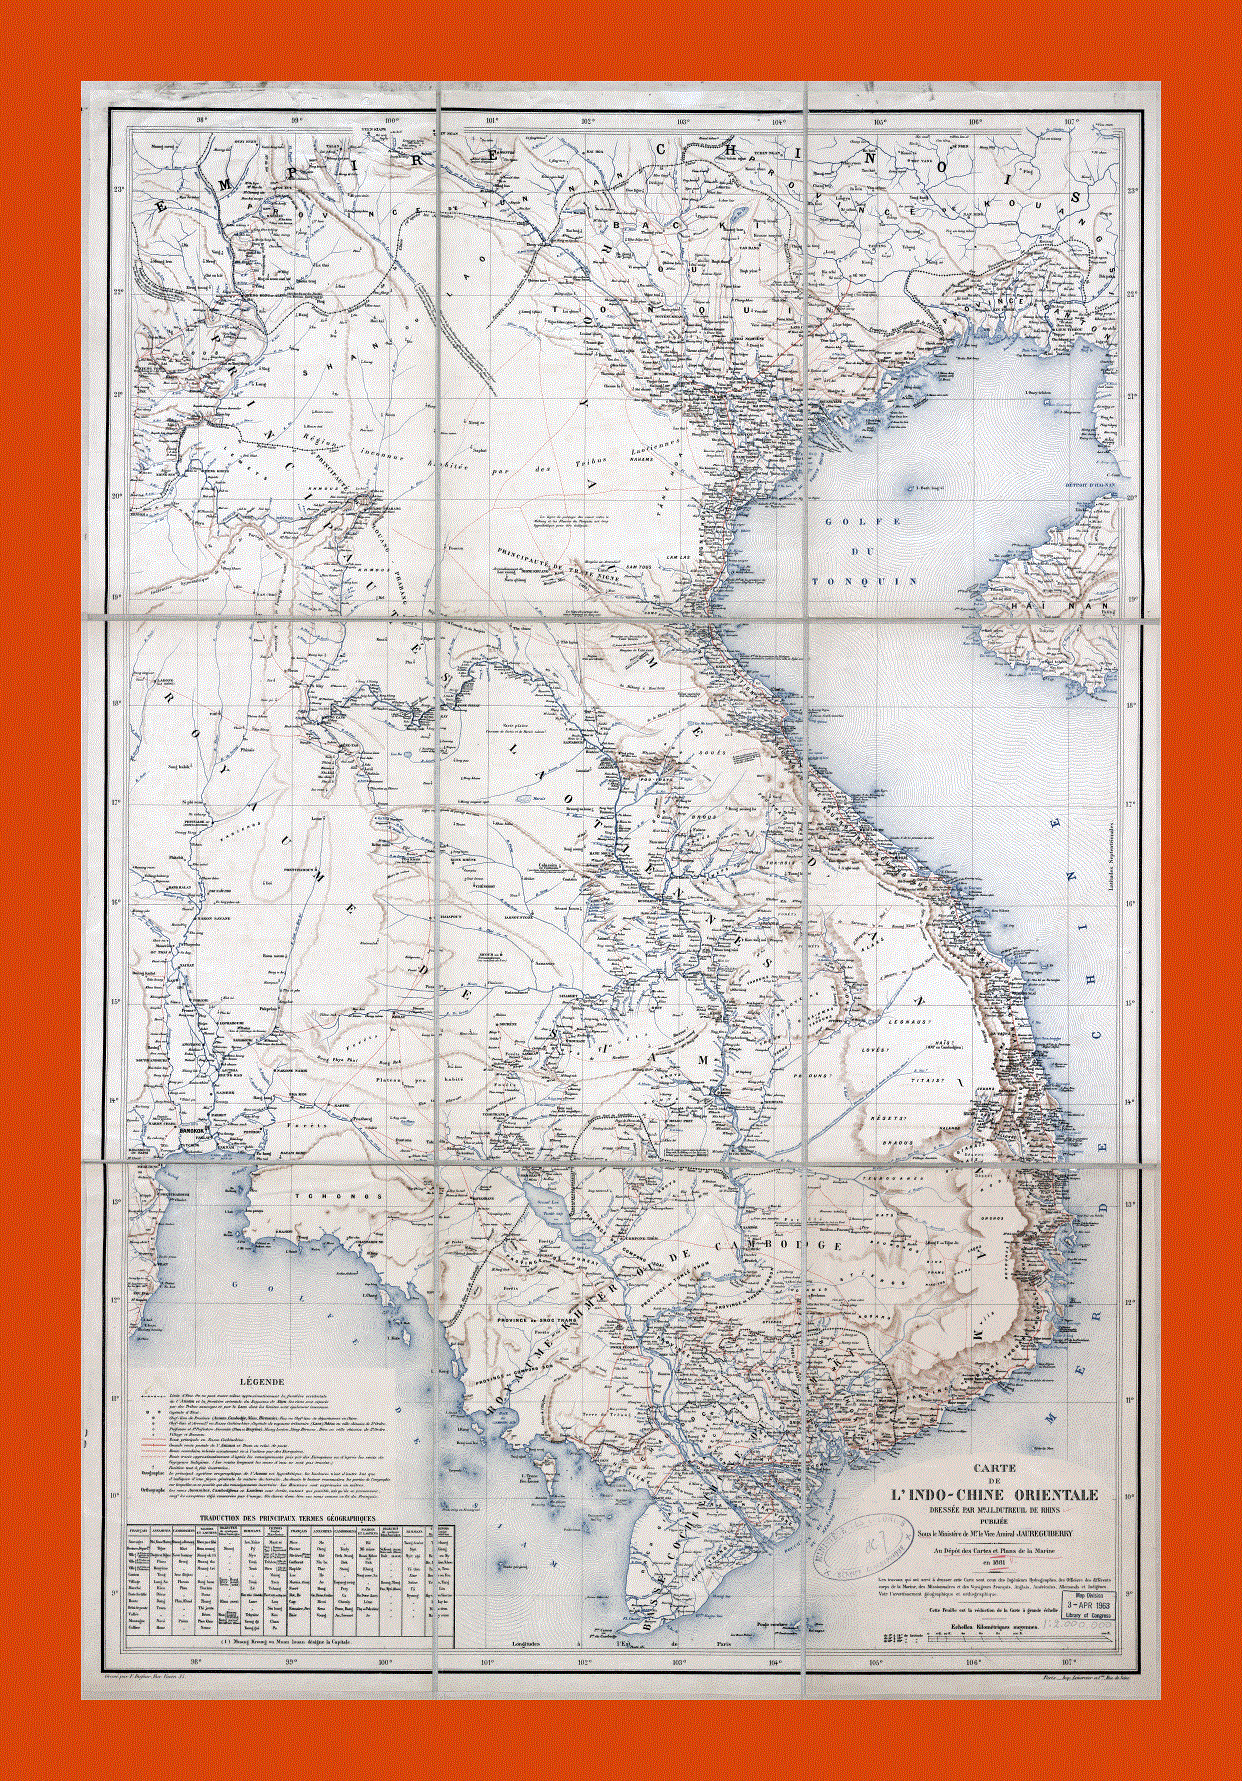 Old map of Indochina - 1881